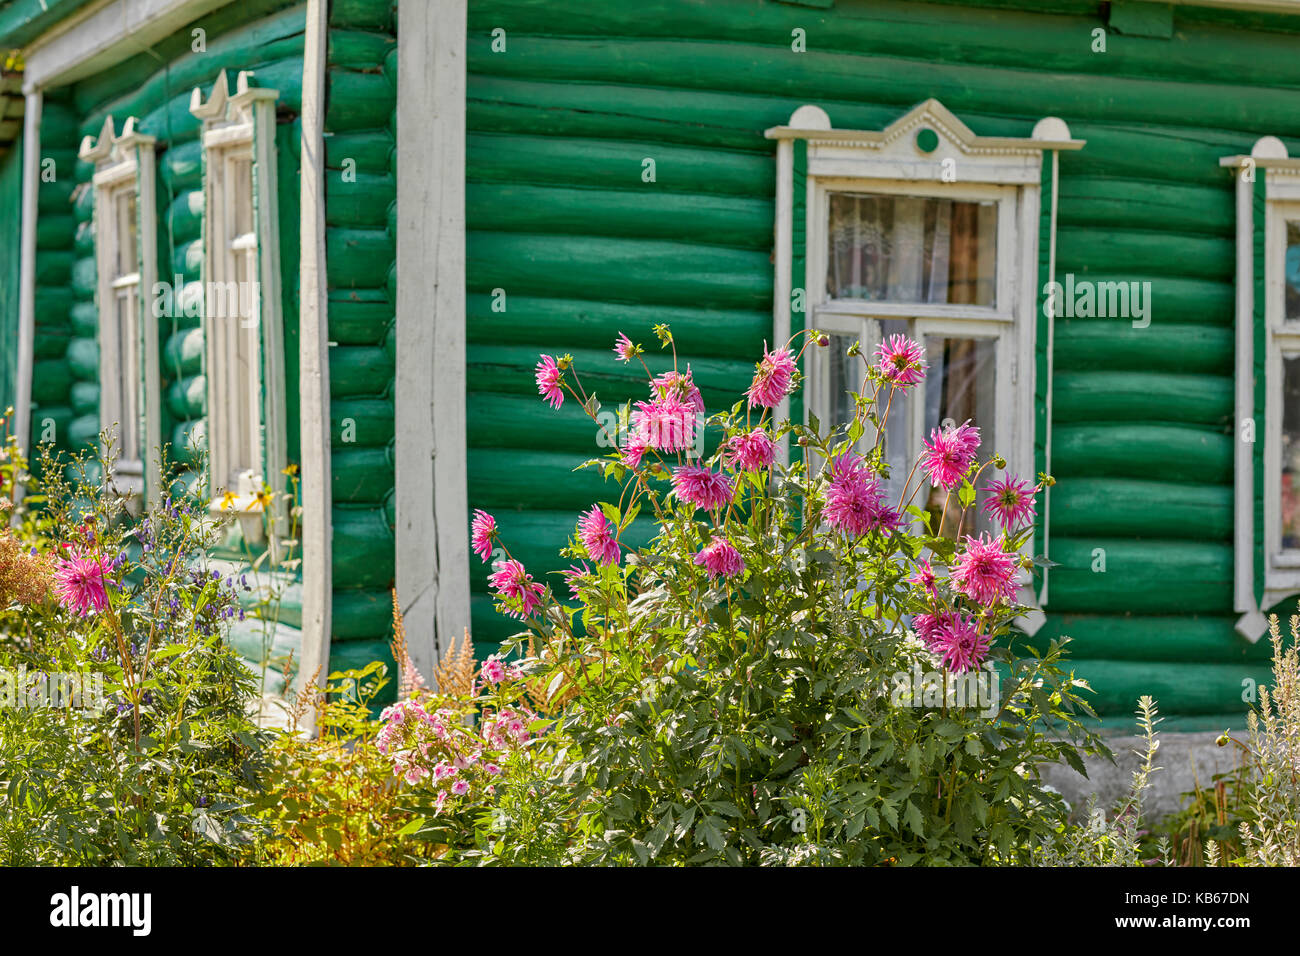 Wooden country log house with flowers in allotment garden. Kaluga Region, Central Russia. Stock Photo